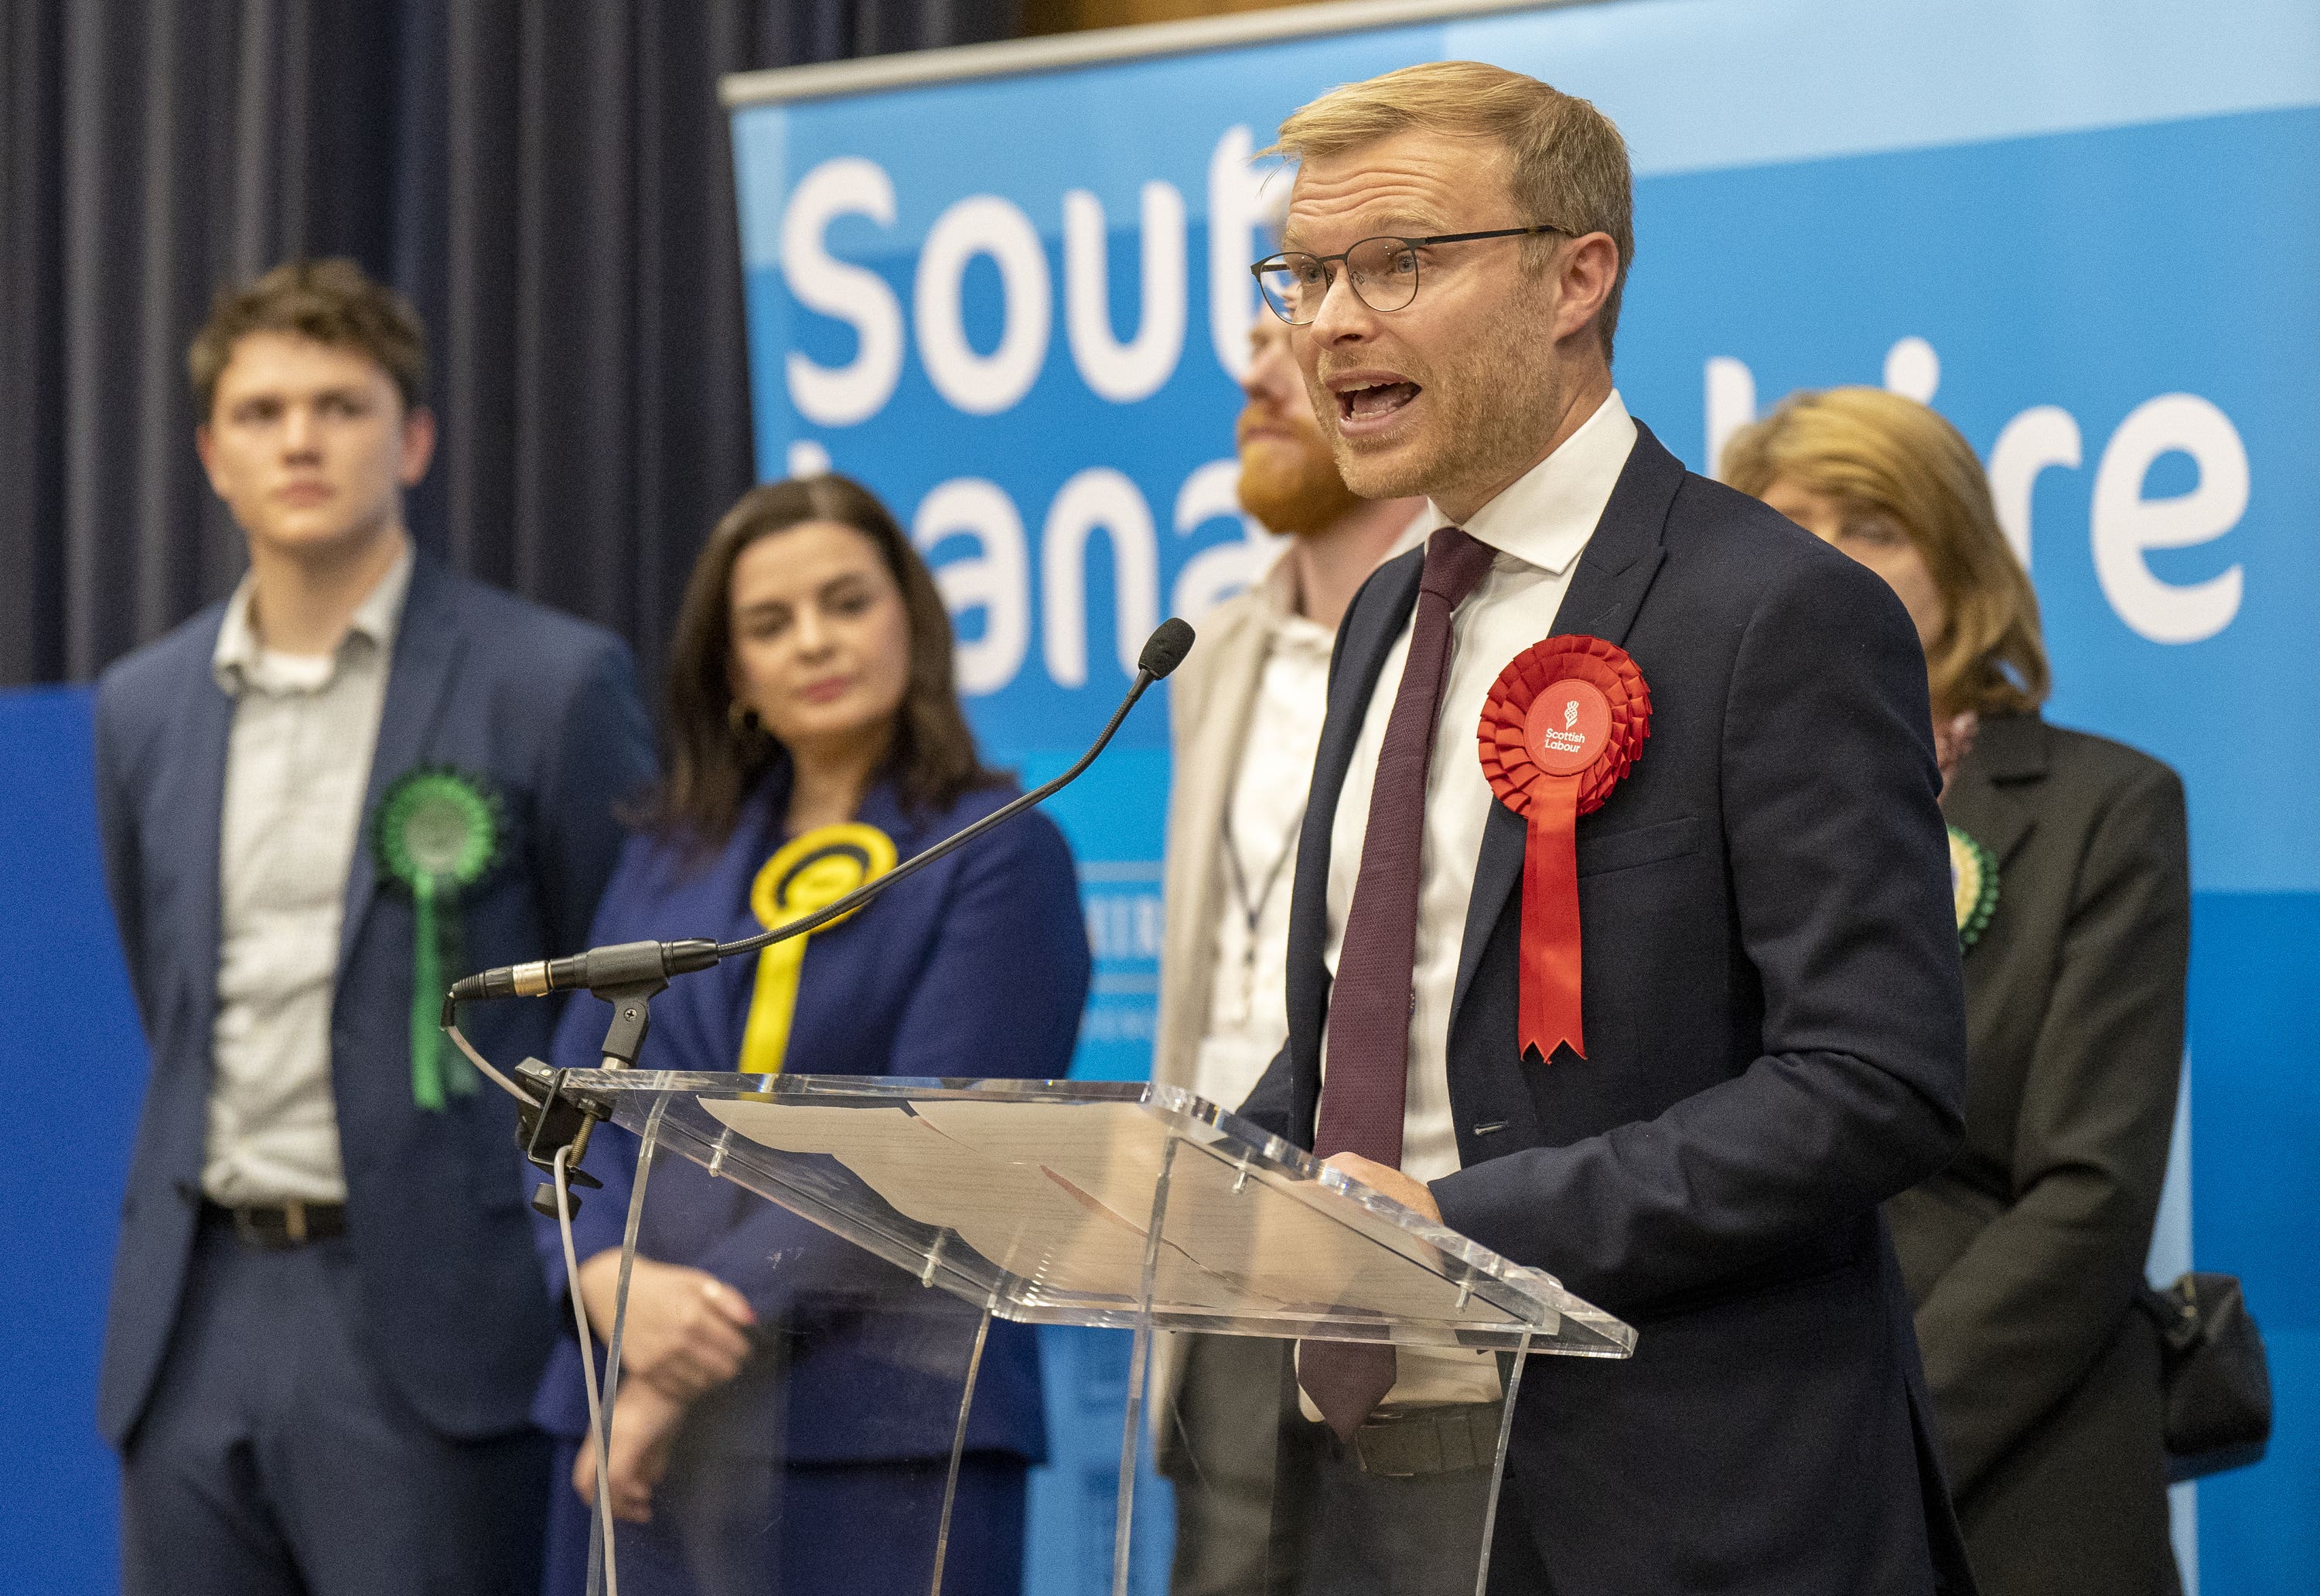 Labour’s Michael Shanks took 58% of the vote.